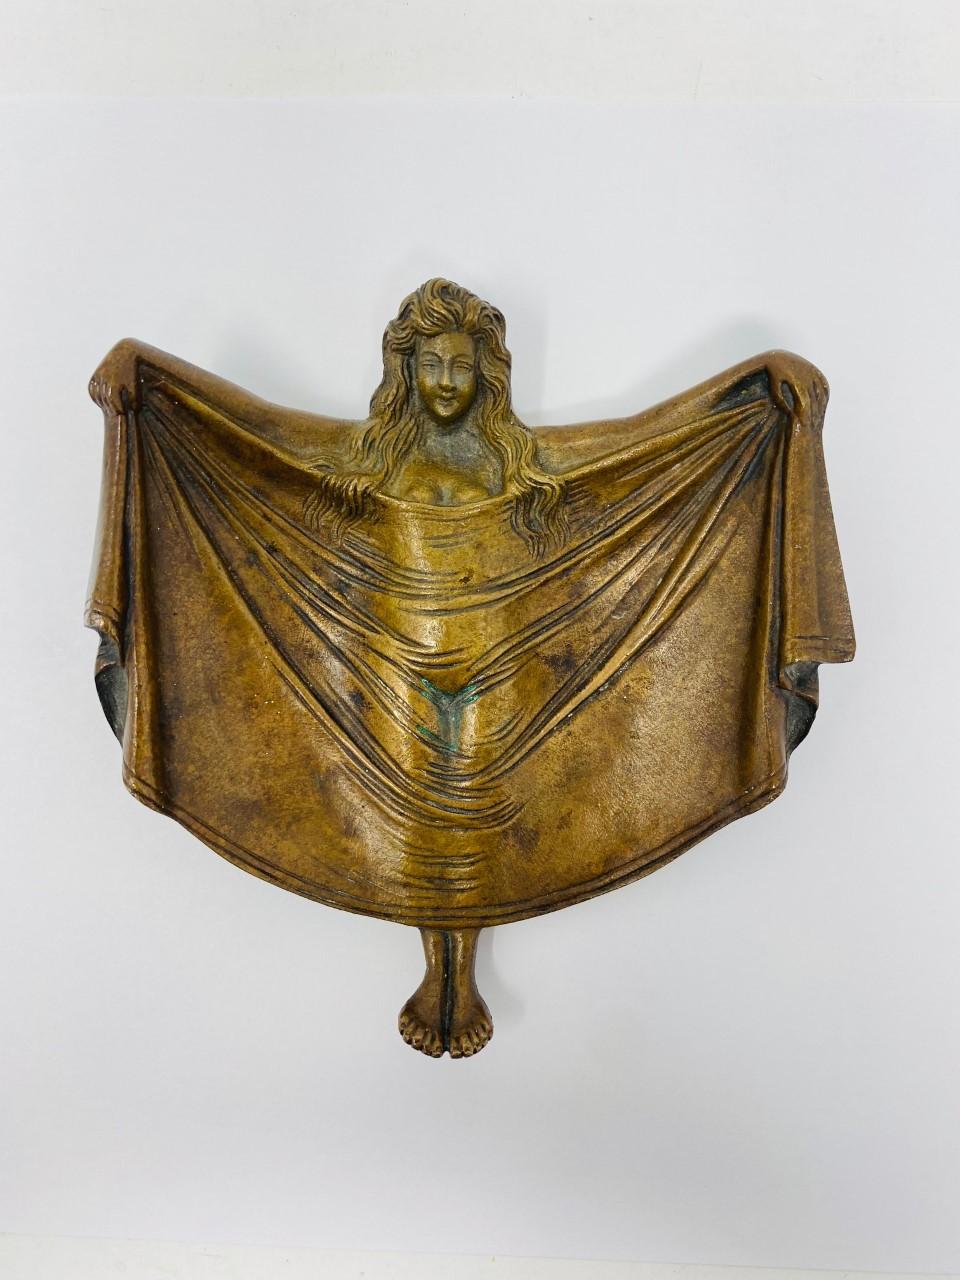 Beautiful ash tray or trinket dish featuring a female figure with her arms outstretched. In the style of Francis Renaud, this small vanity tray is beautifully detailed and evokes the art noueveau ideals (female nymph figure) that characterizes that